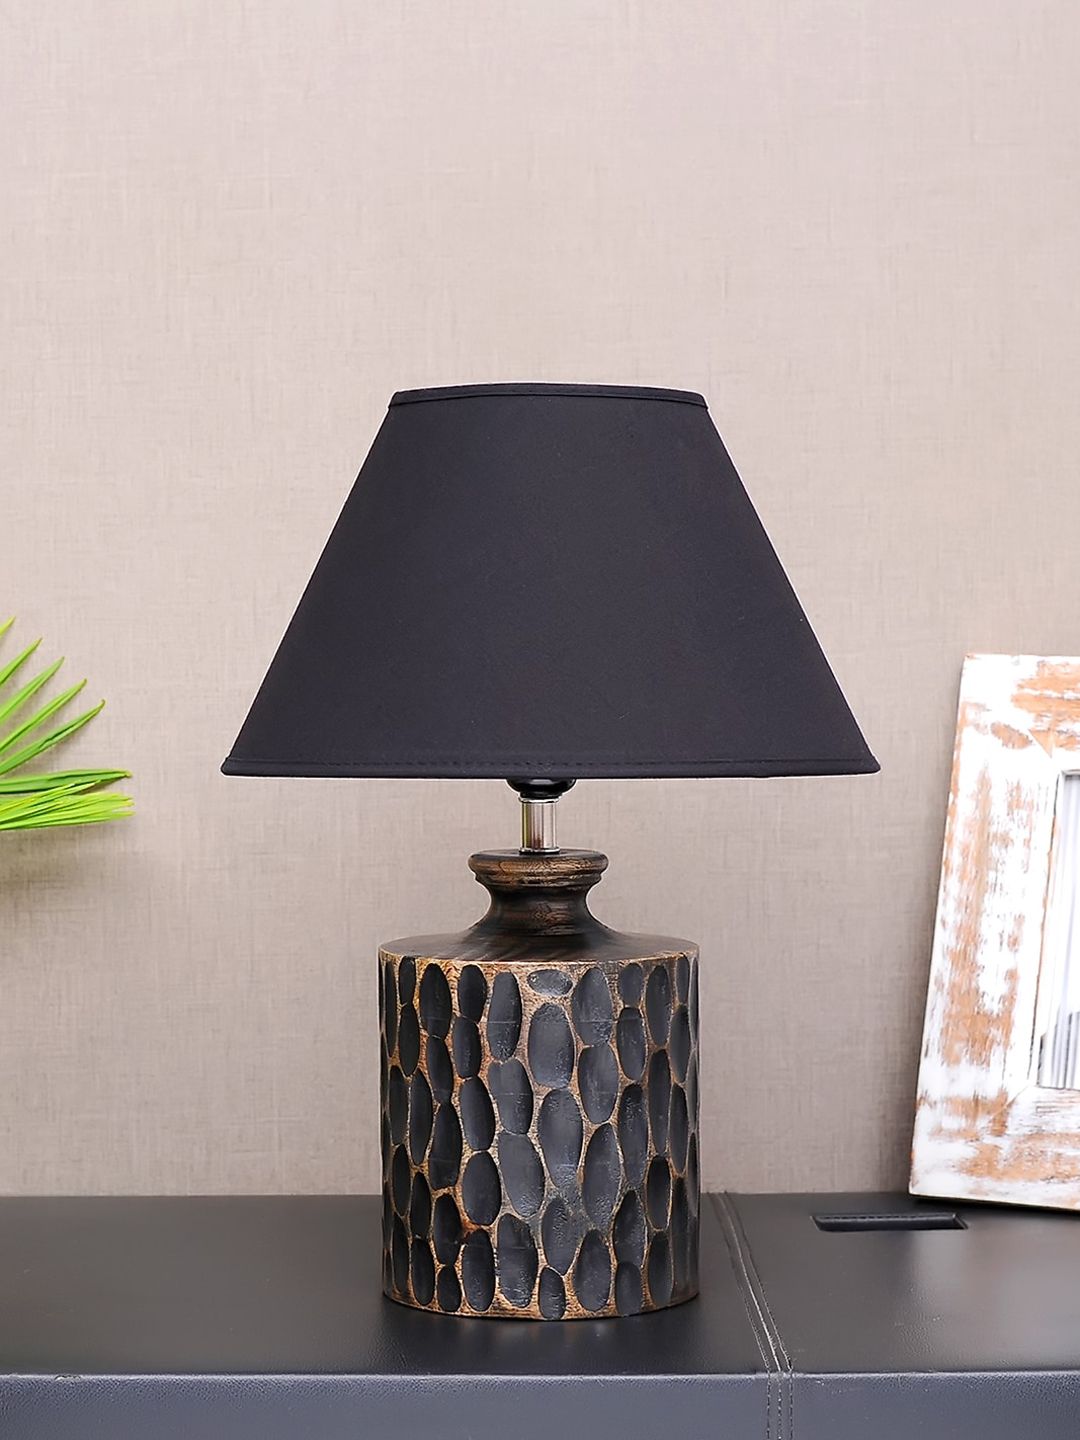 THE LIGHT STORE Black Self-Design Bedside Standard Lamp With Shade Price in India